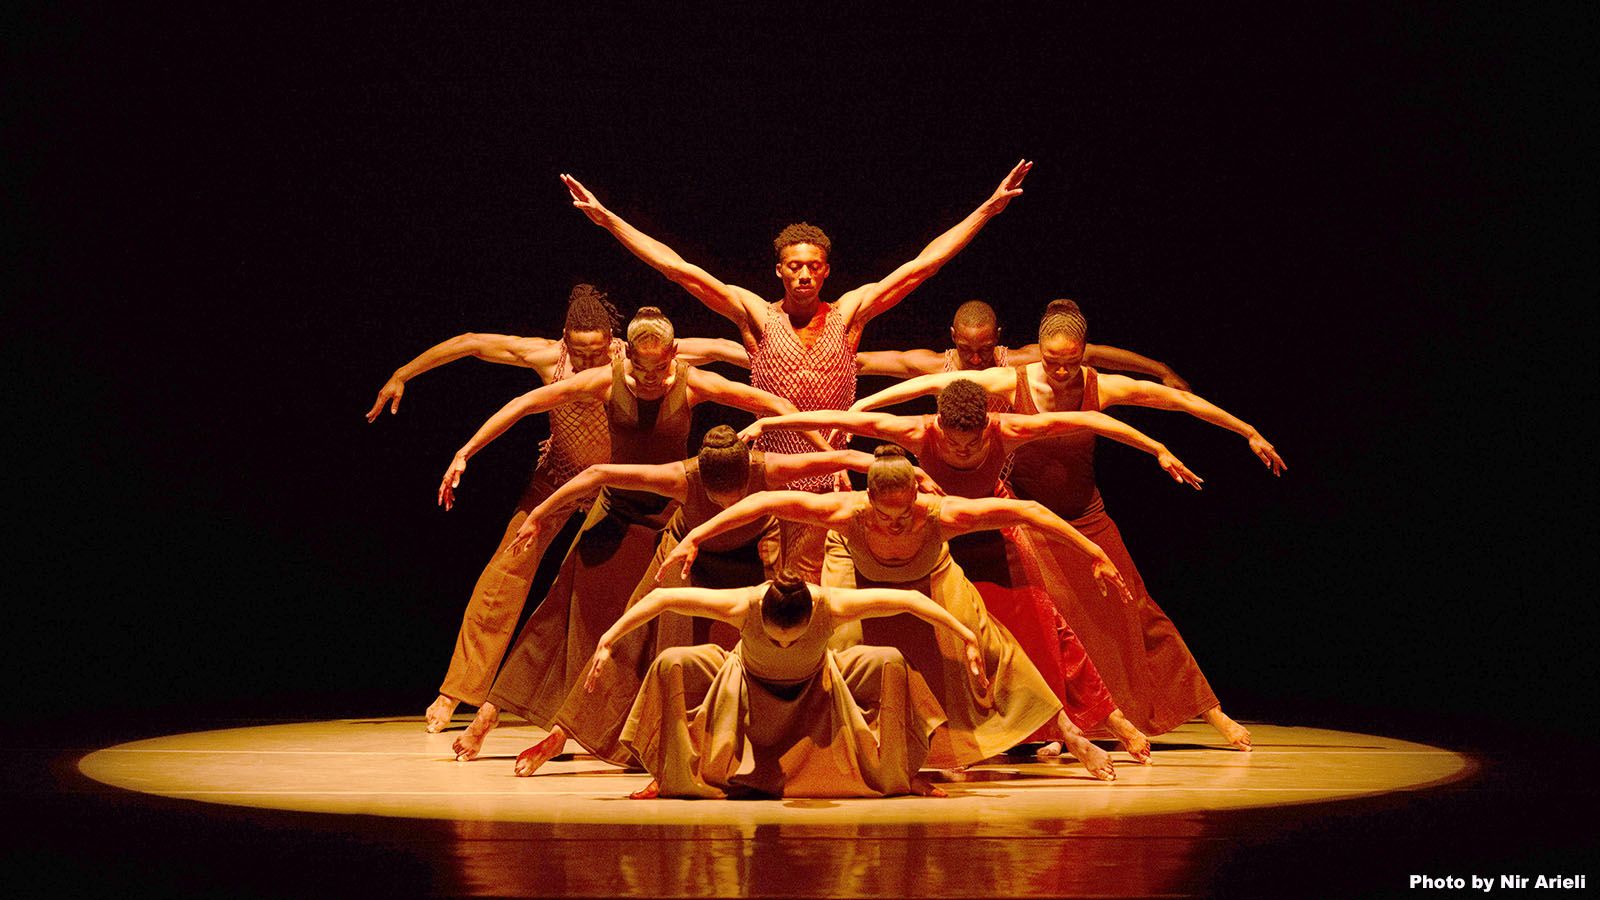 Ailey II will perform "Revelations" on Thursday, March 7, at Embassy Theatre.